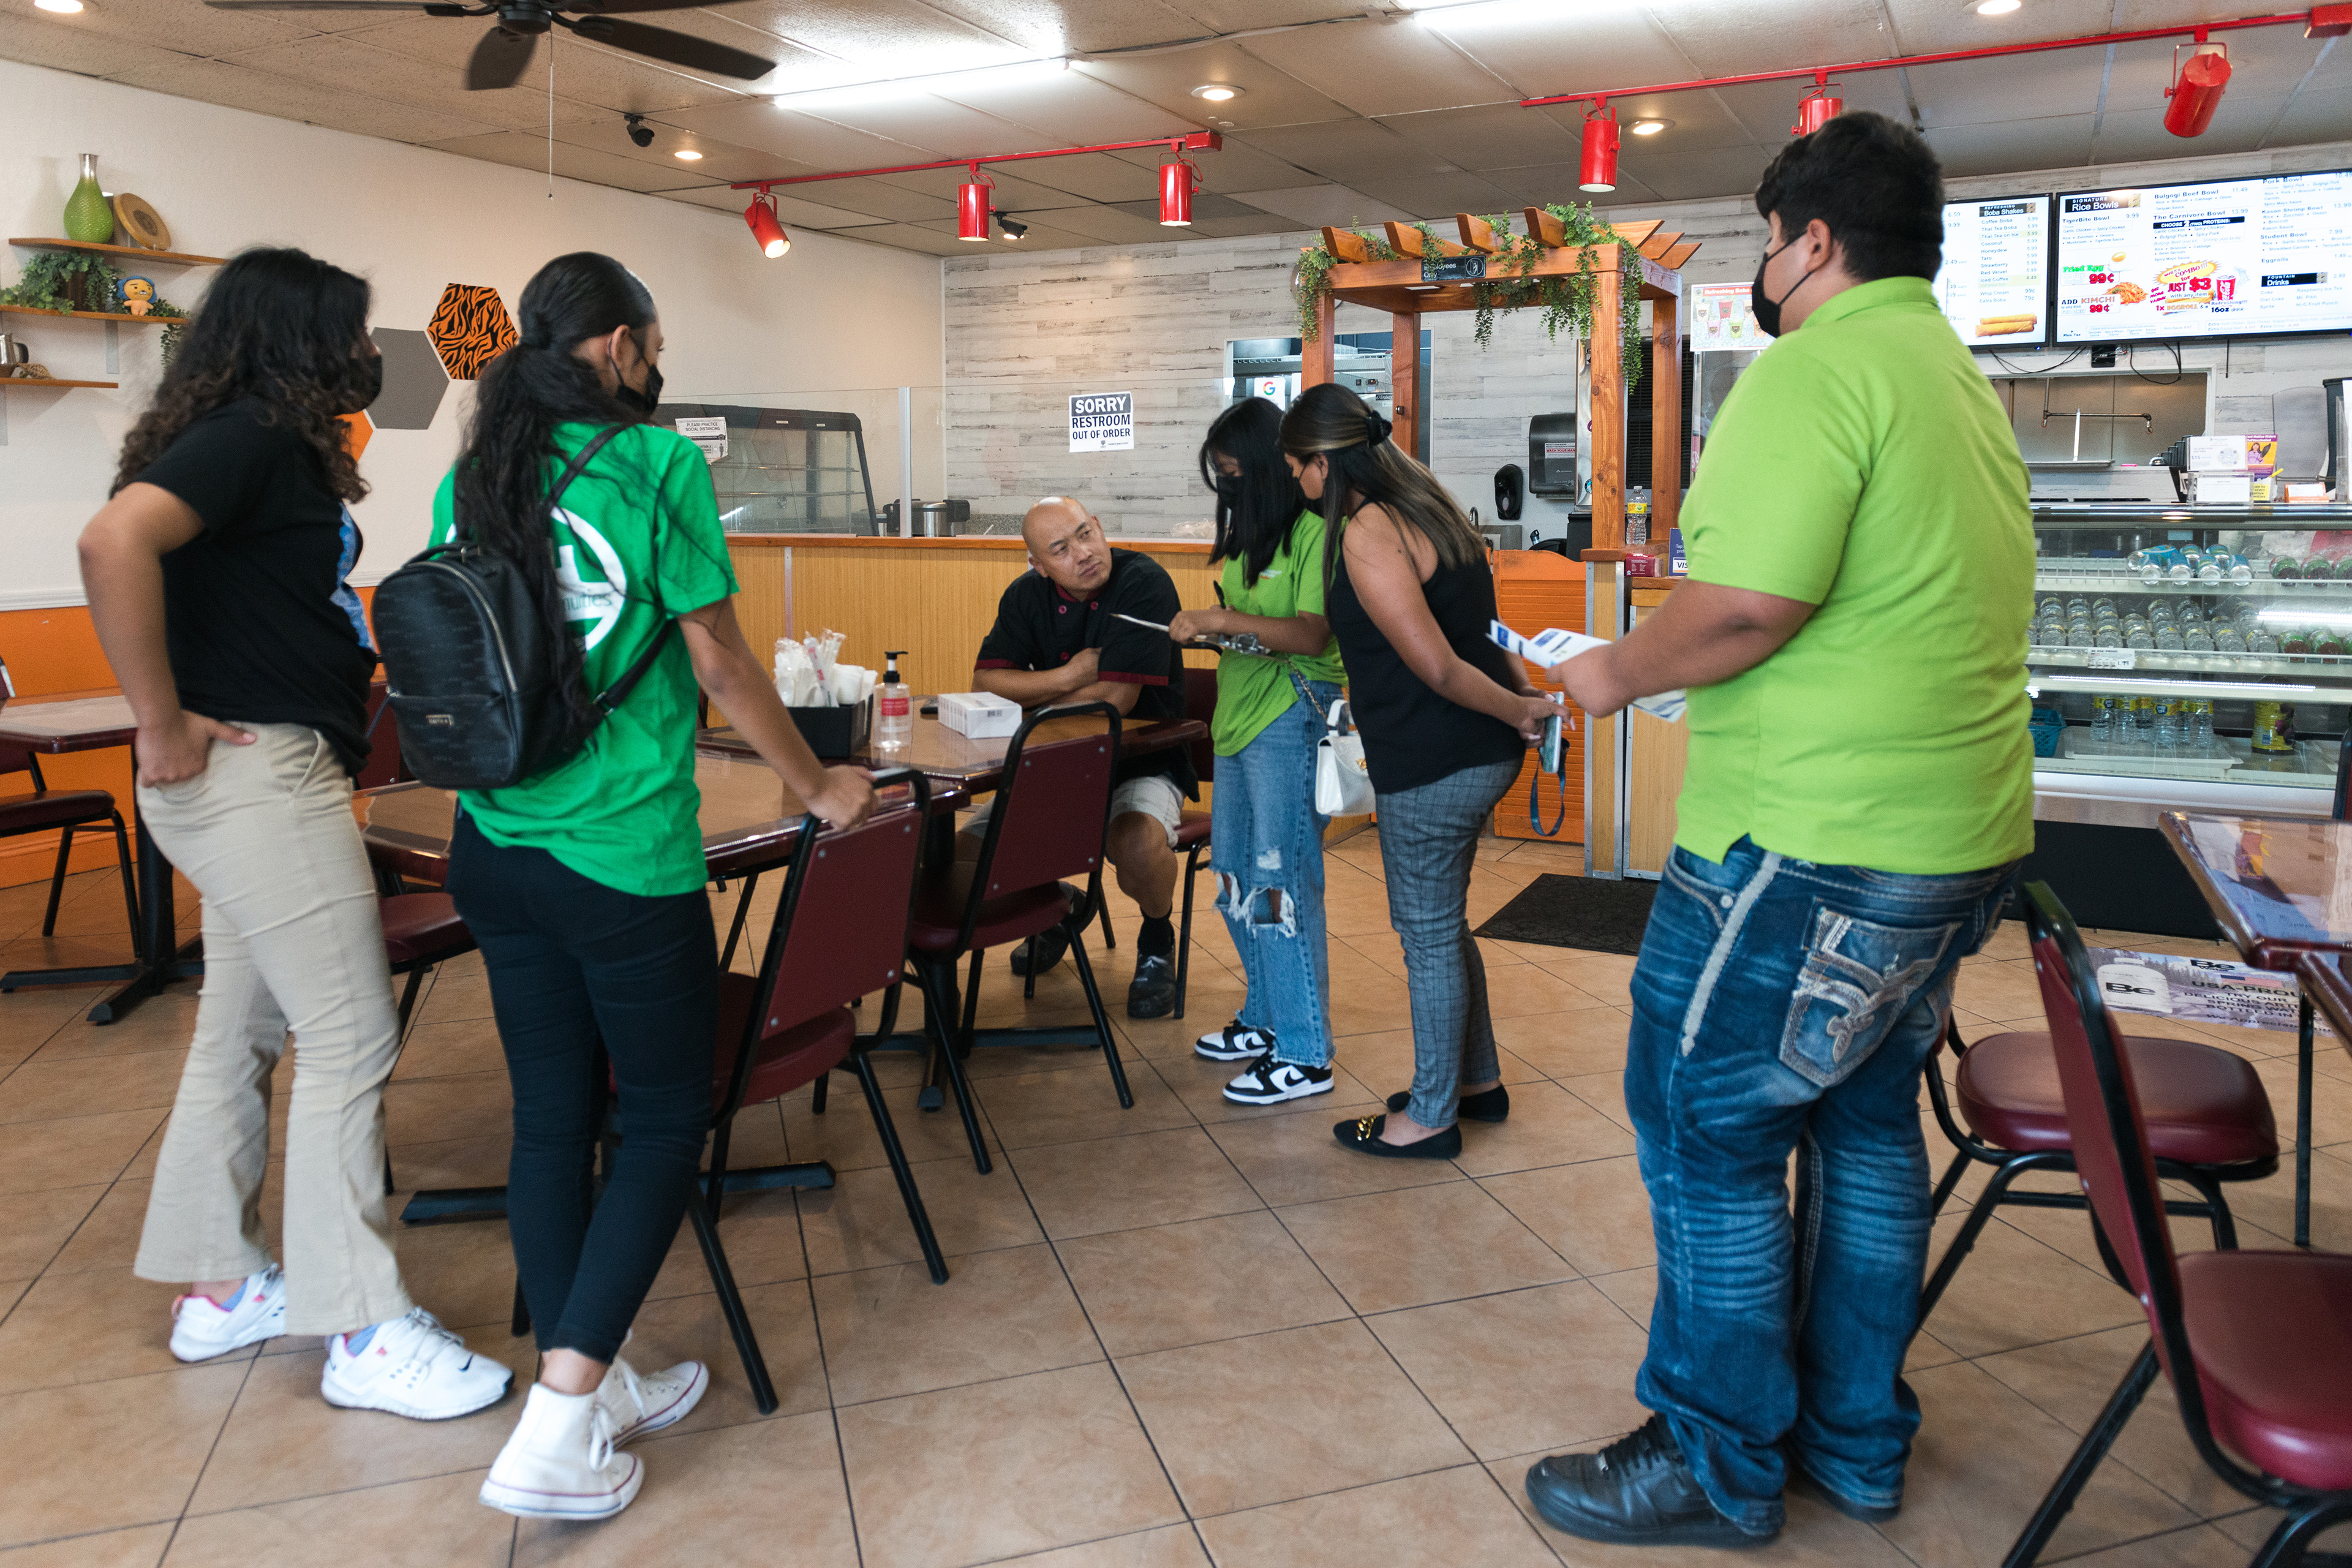 Teens deliver covid tests and information flyers to Chris Vang, a restaurant owner. Vang is seated at a table inside the restaurant while the teens stand around him.